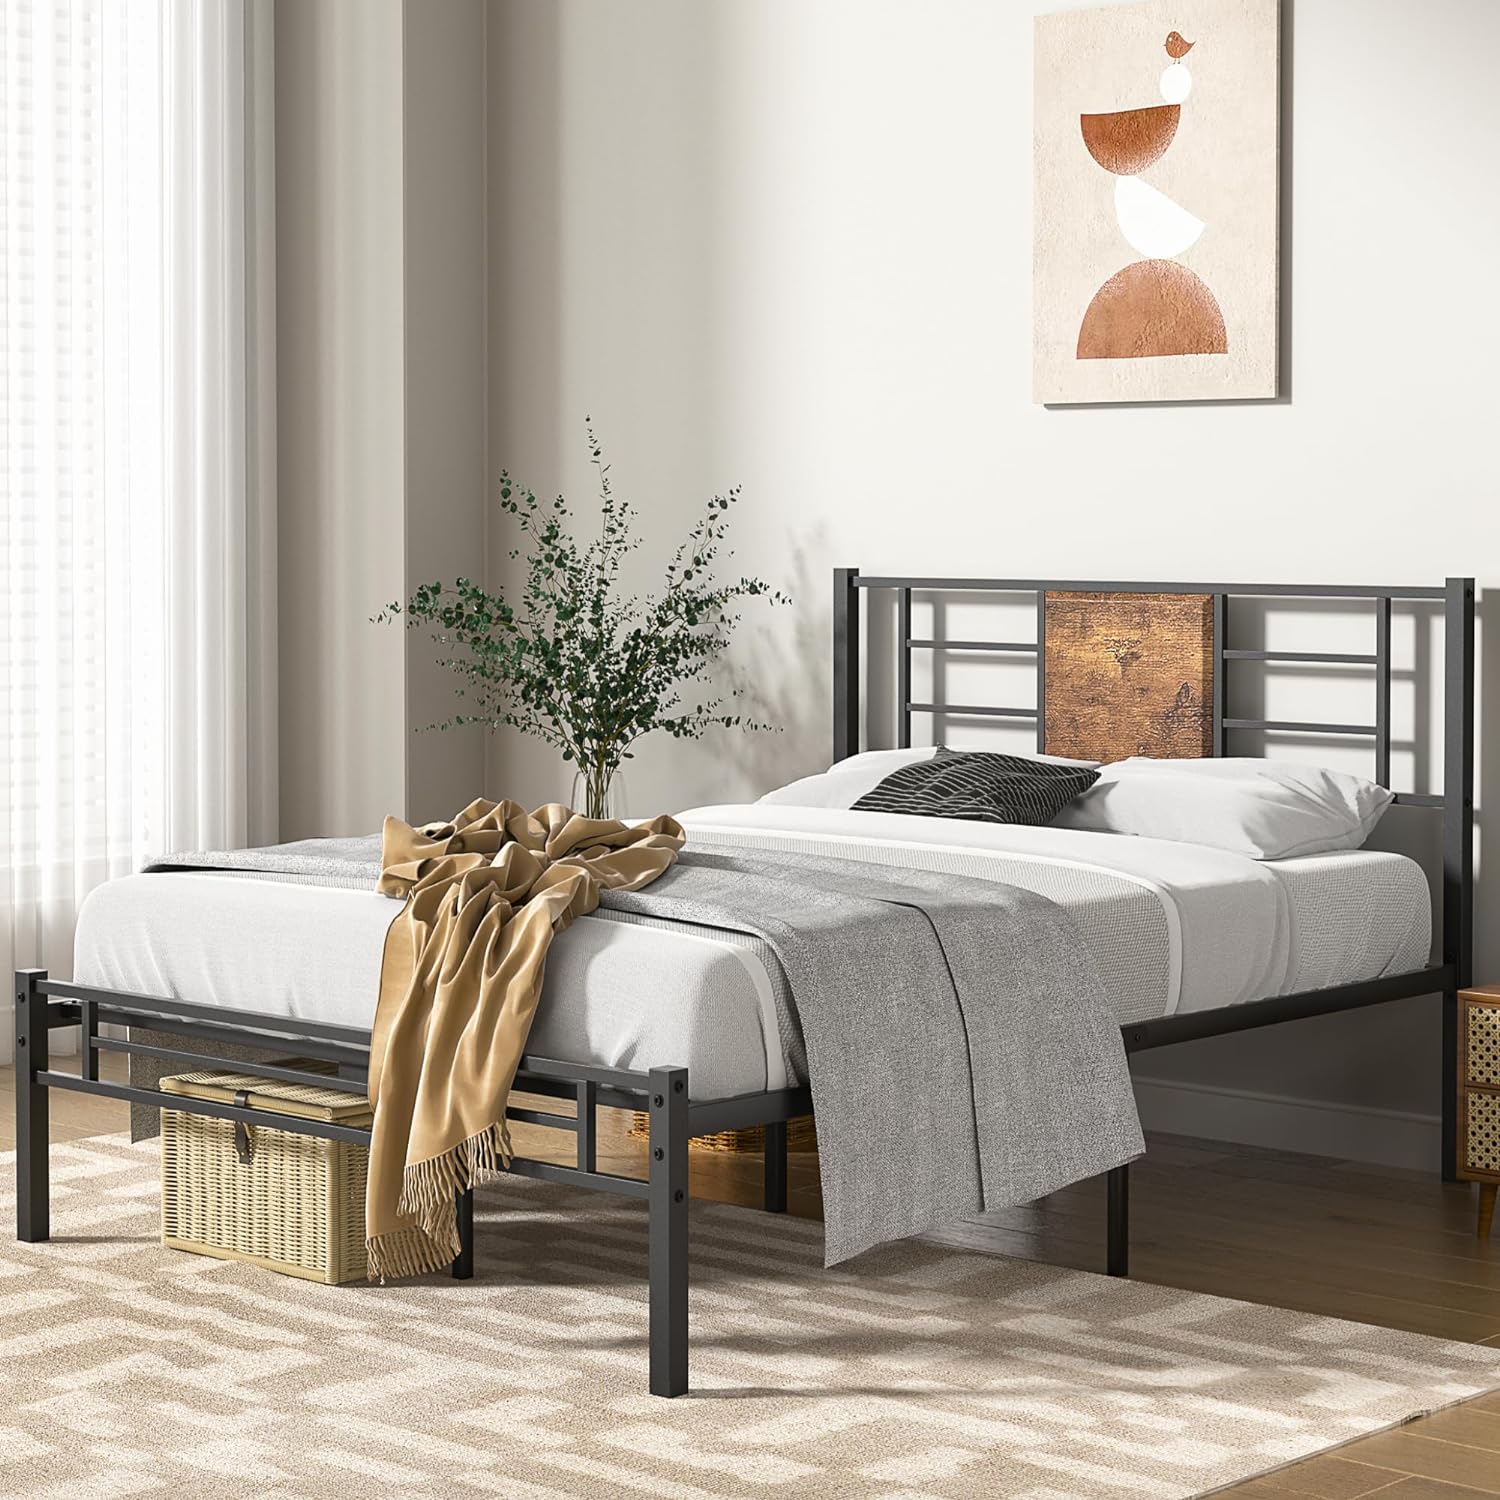 VECELO Platform Bed Frame Mattress Foundation with Headboard and Footboard